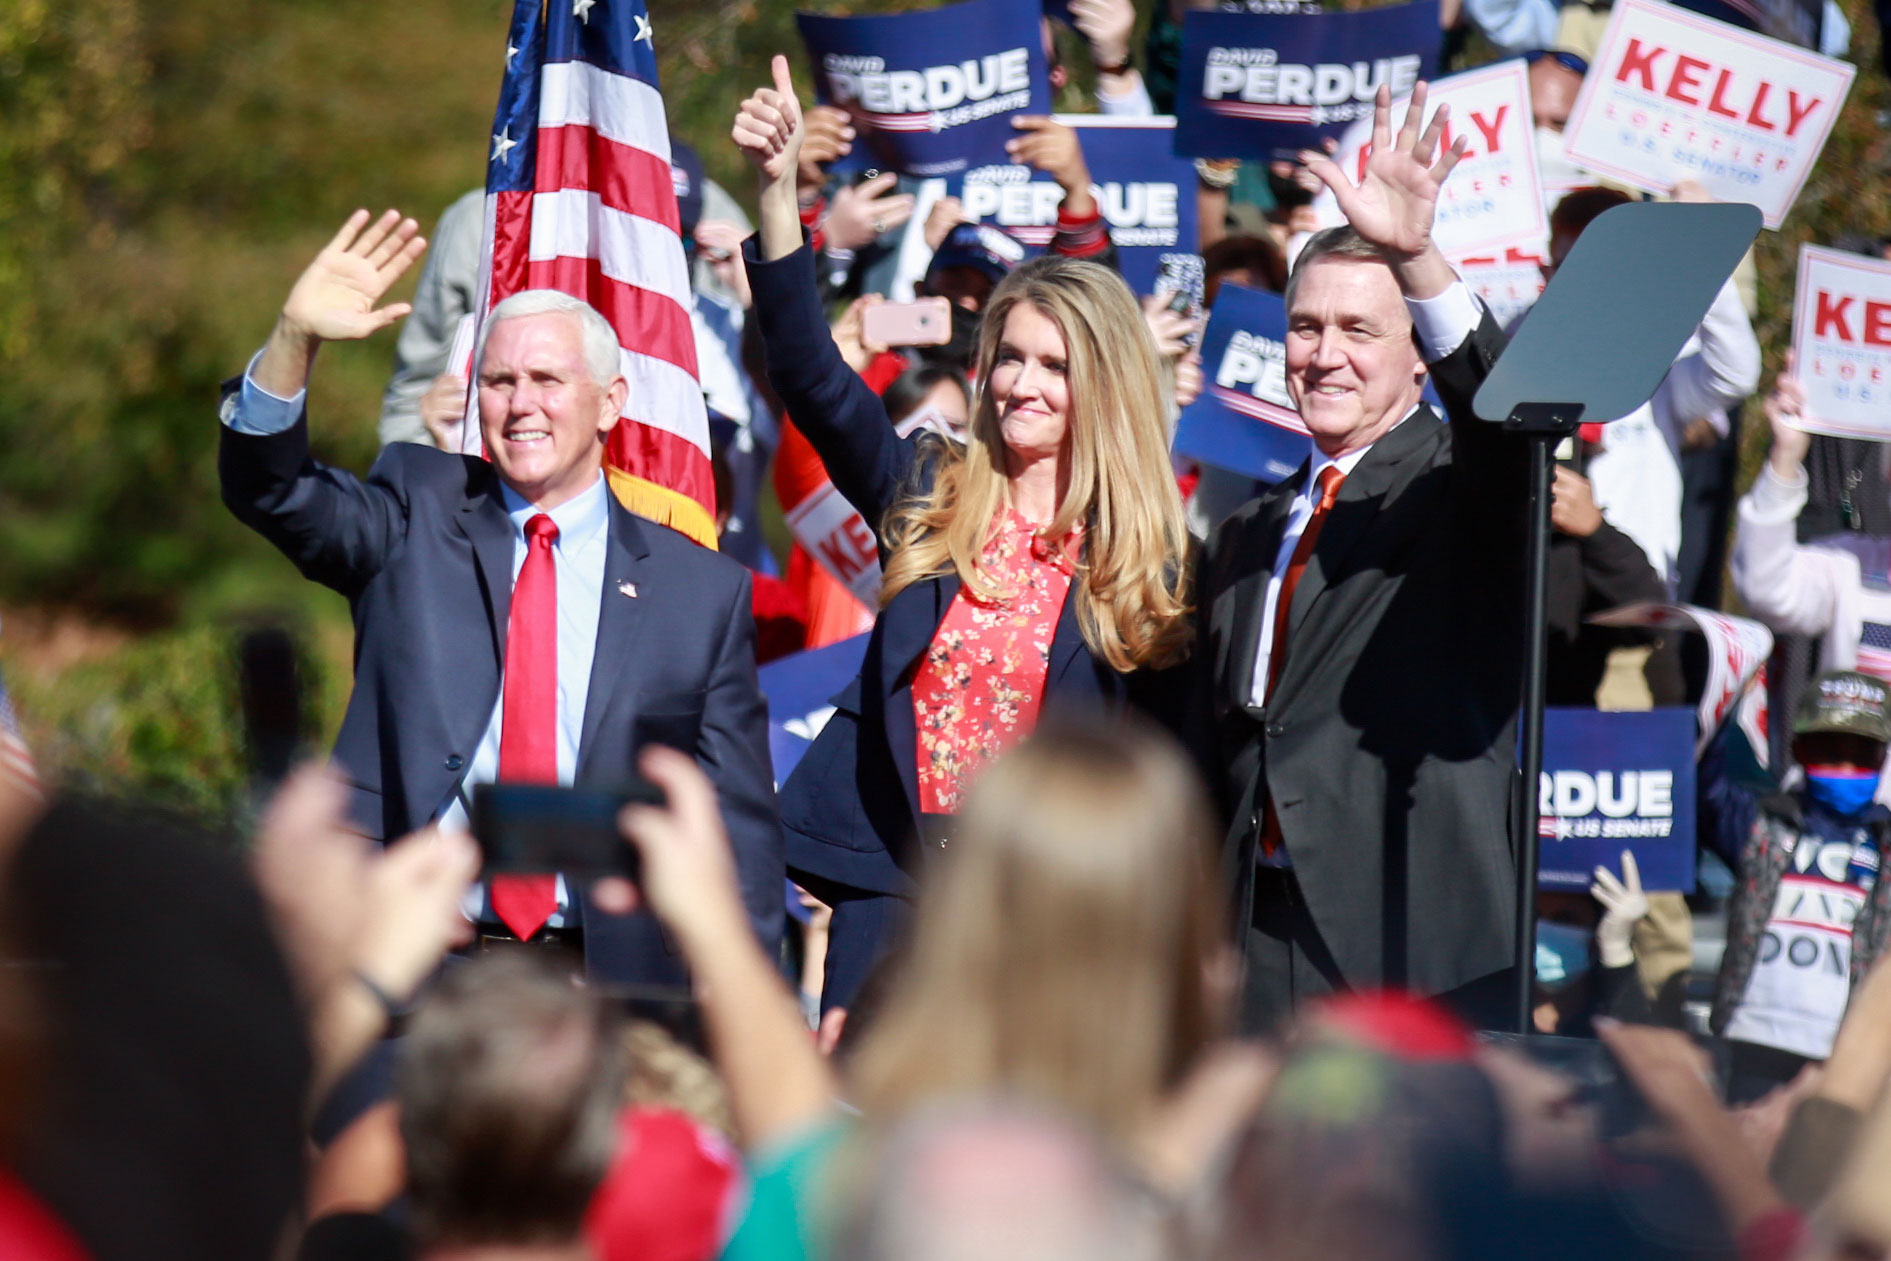 Vice President Mike Pence, Sen. Kelly Loeffler and Sen. David Perdue wave to supporters at a campaign rally in Canton, Georgia, on November 20.